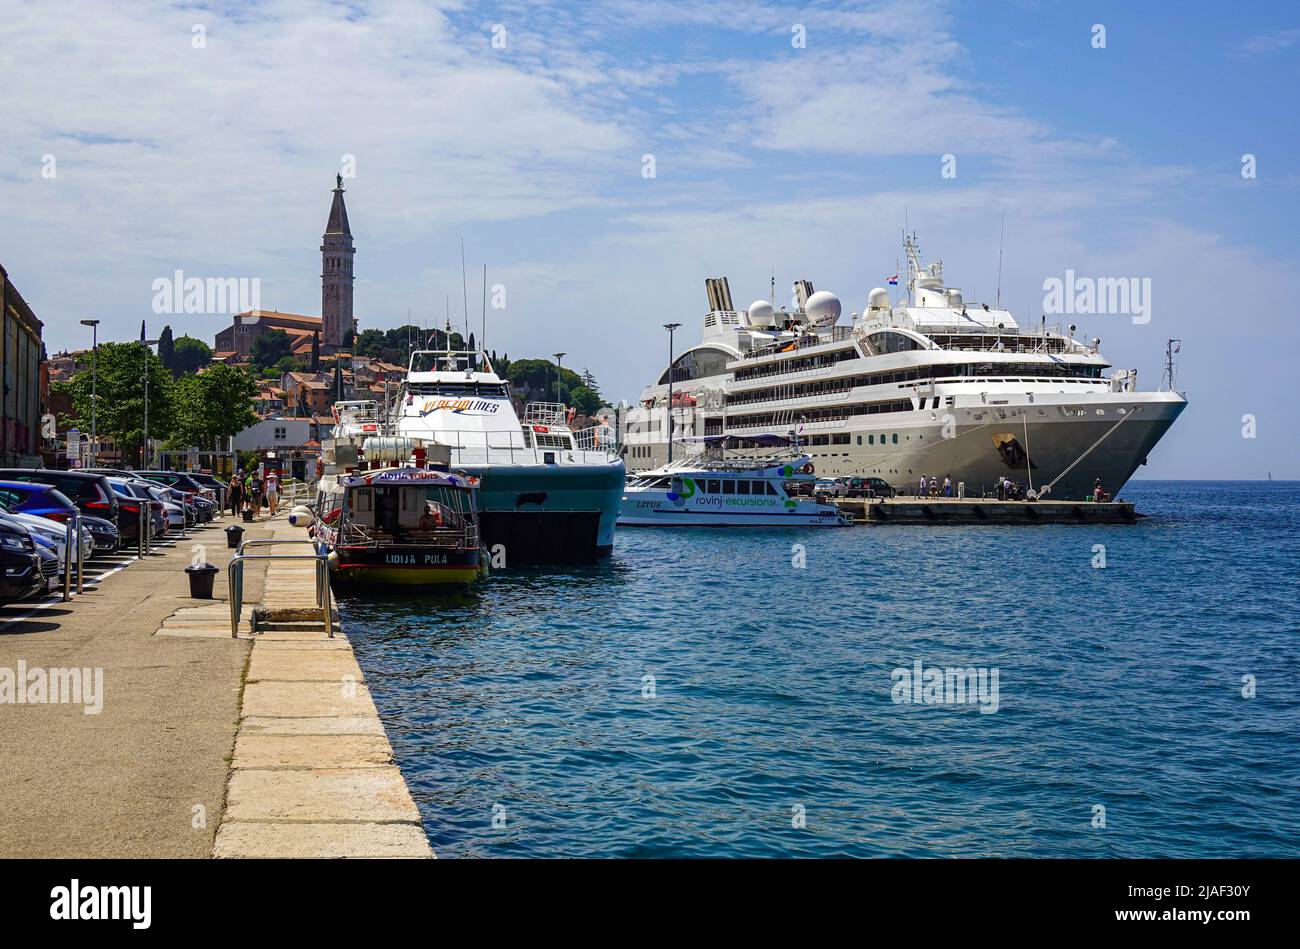 The French cruise liner of Le Lyrial moored by the old town of Rovinj, Rovigno, Istria, Croatia, Stock Photo